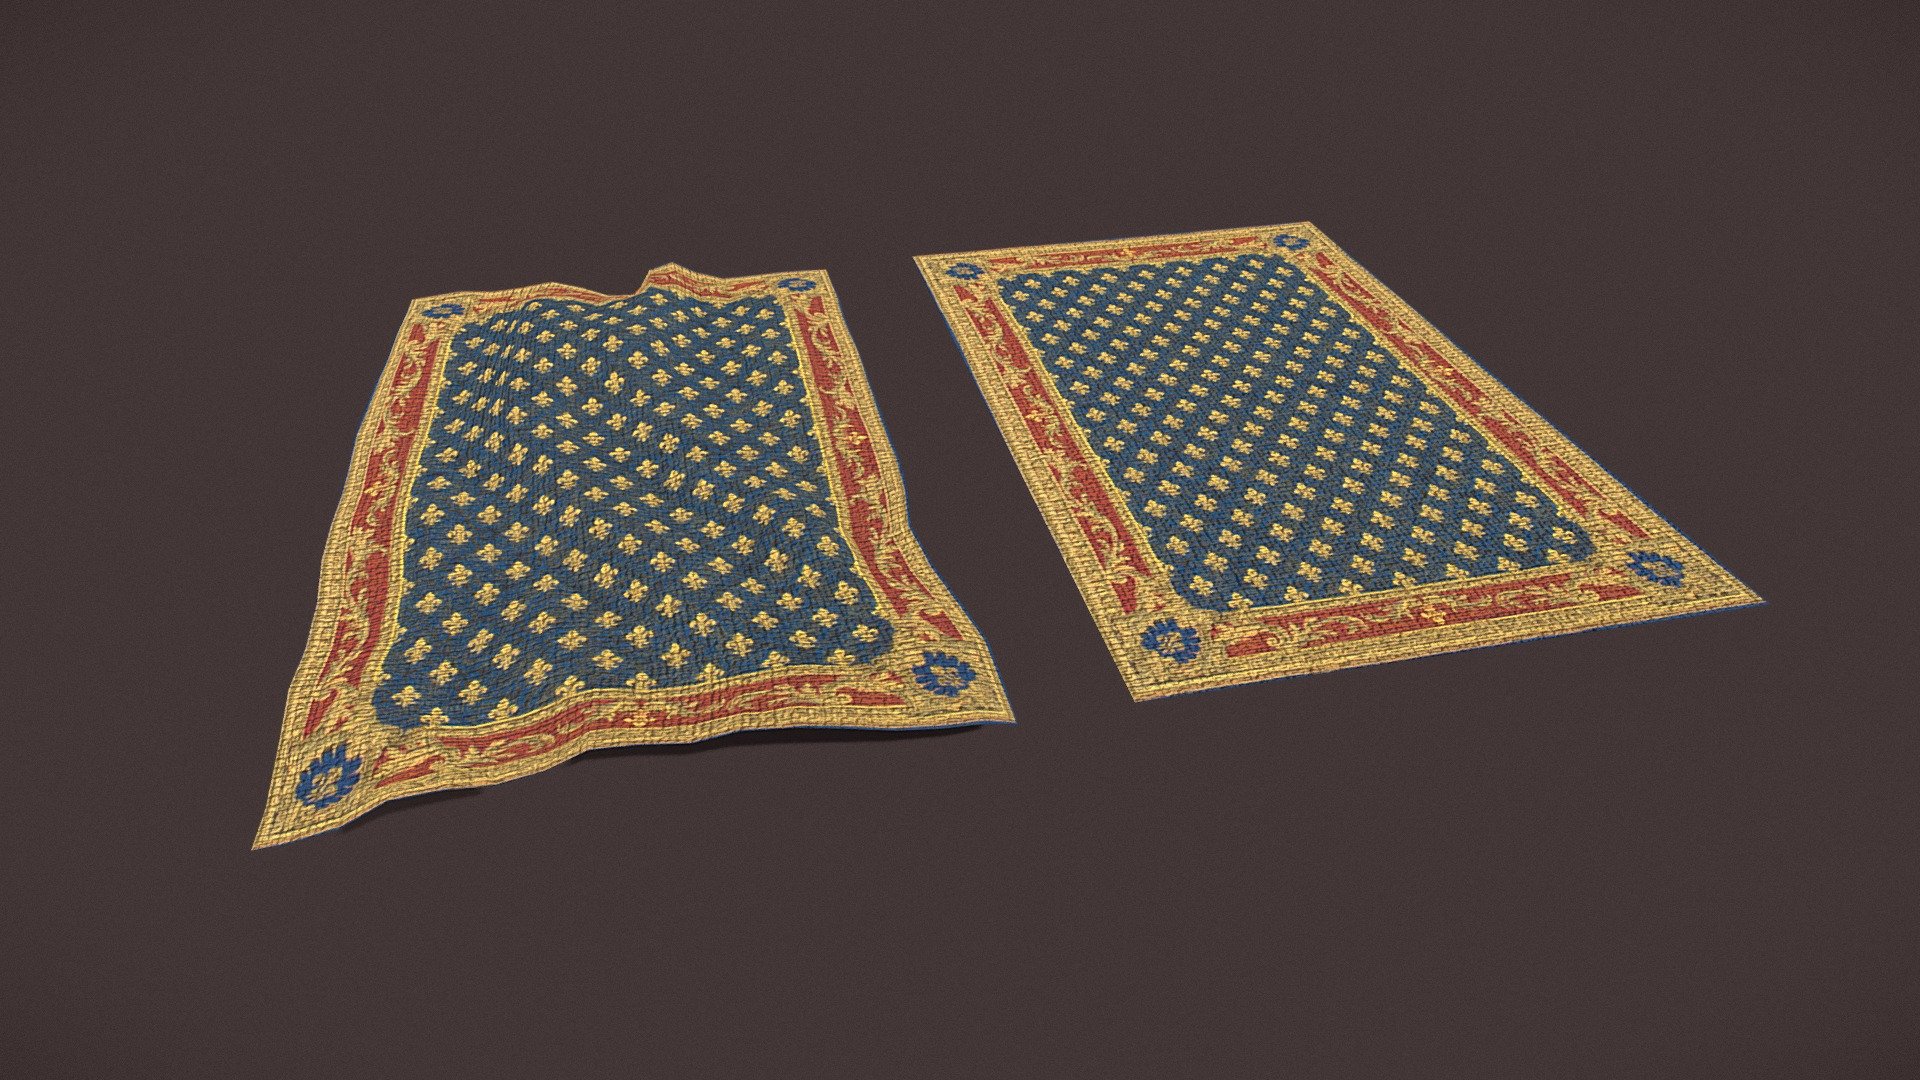 Blue Fleur Tapestry 3D Model. PBR Texture available in 4096 x 4096 Maps include : Basecolor, Normal, Roughness, and Metallic 3d model